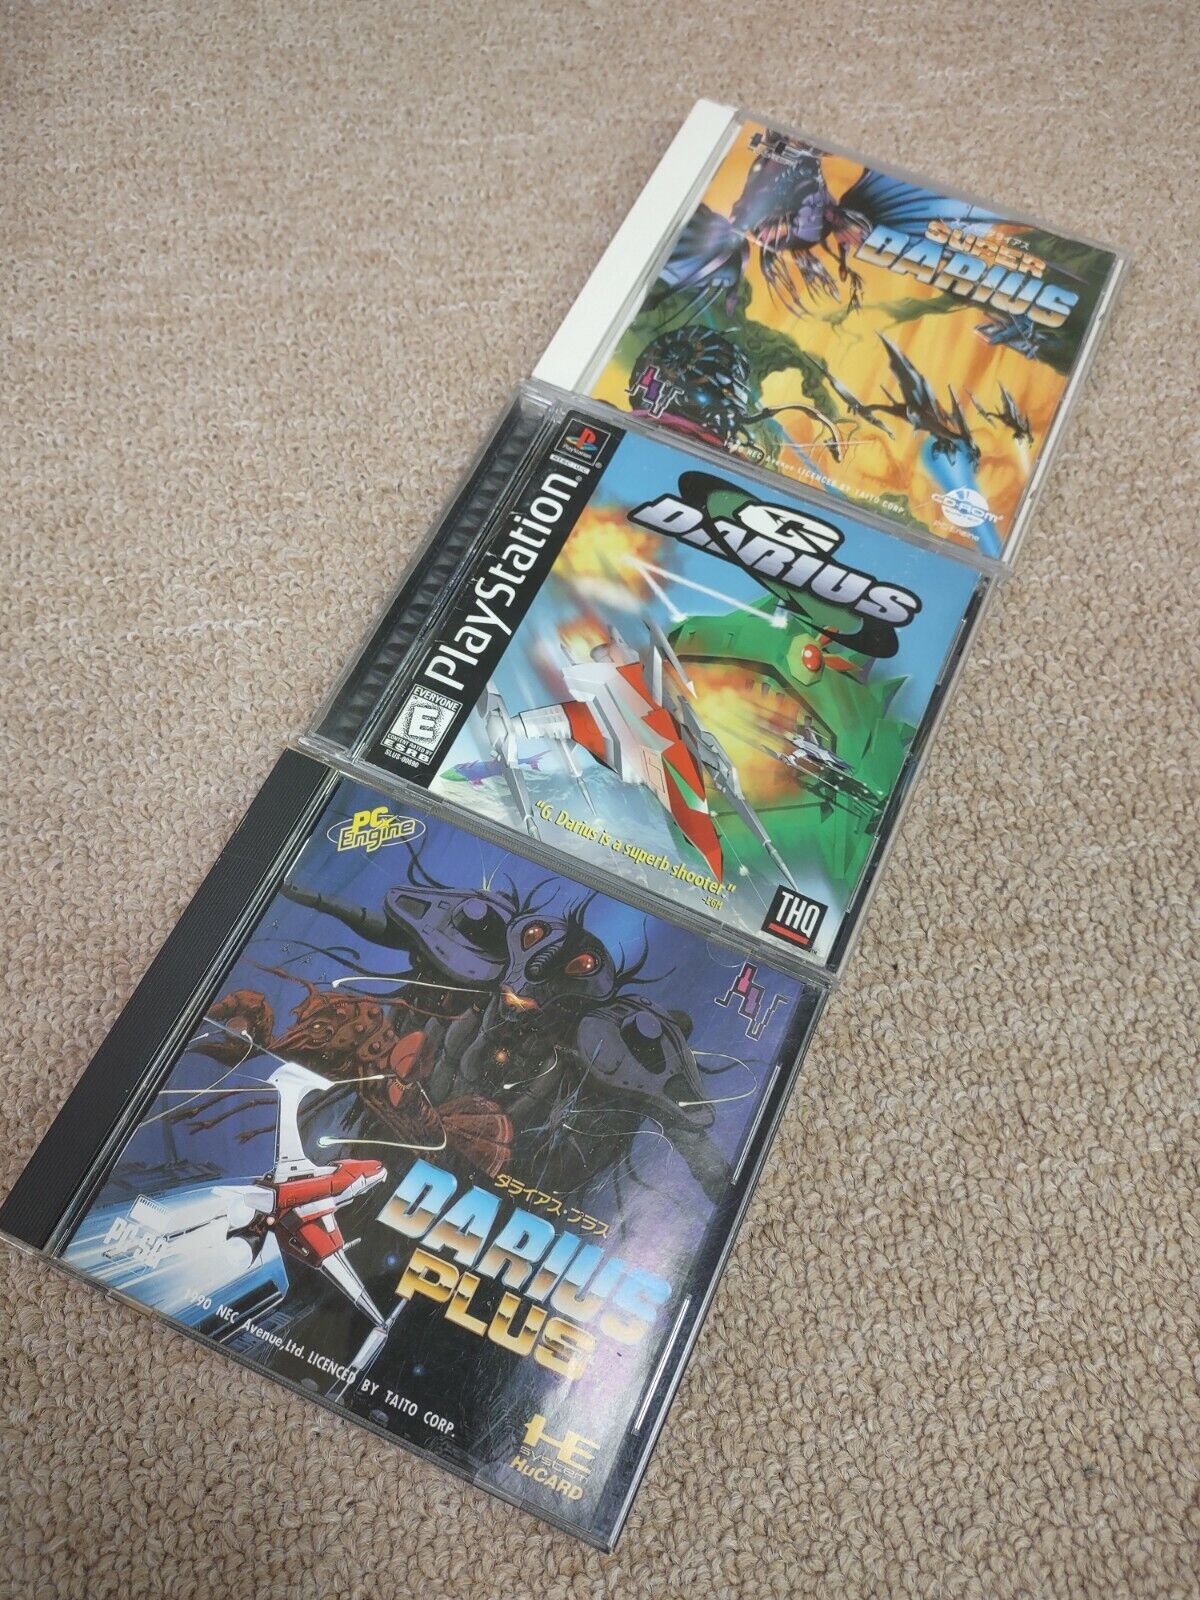 Darius Video game lot: G Super Weekly update Alpha PS1 PCE and And for Max 59% OFF